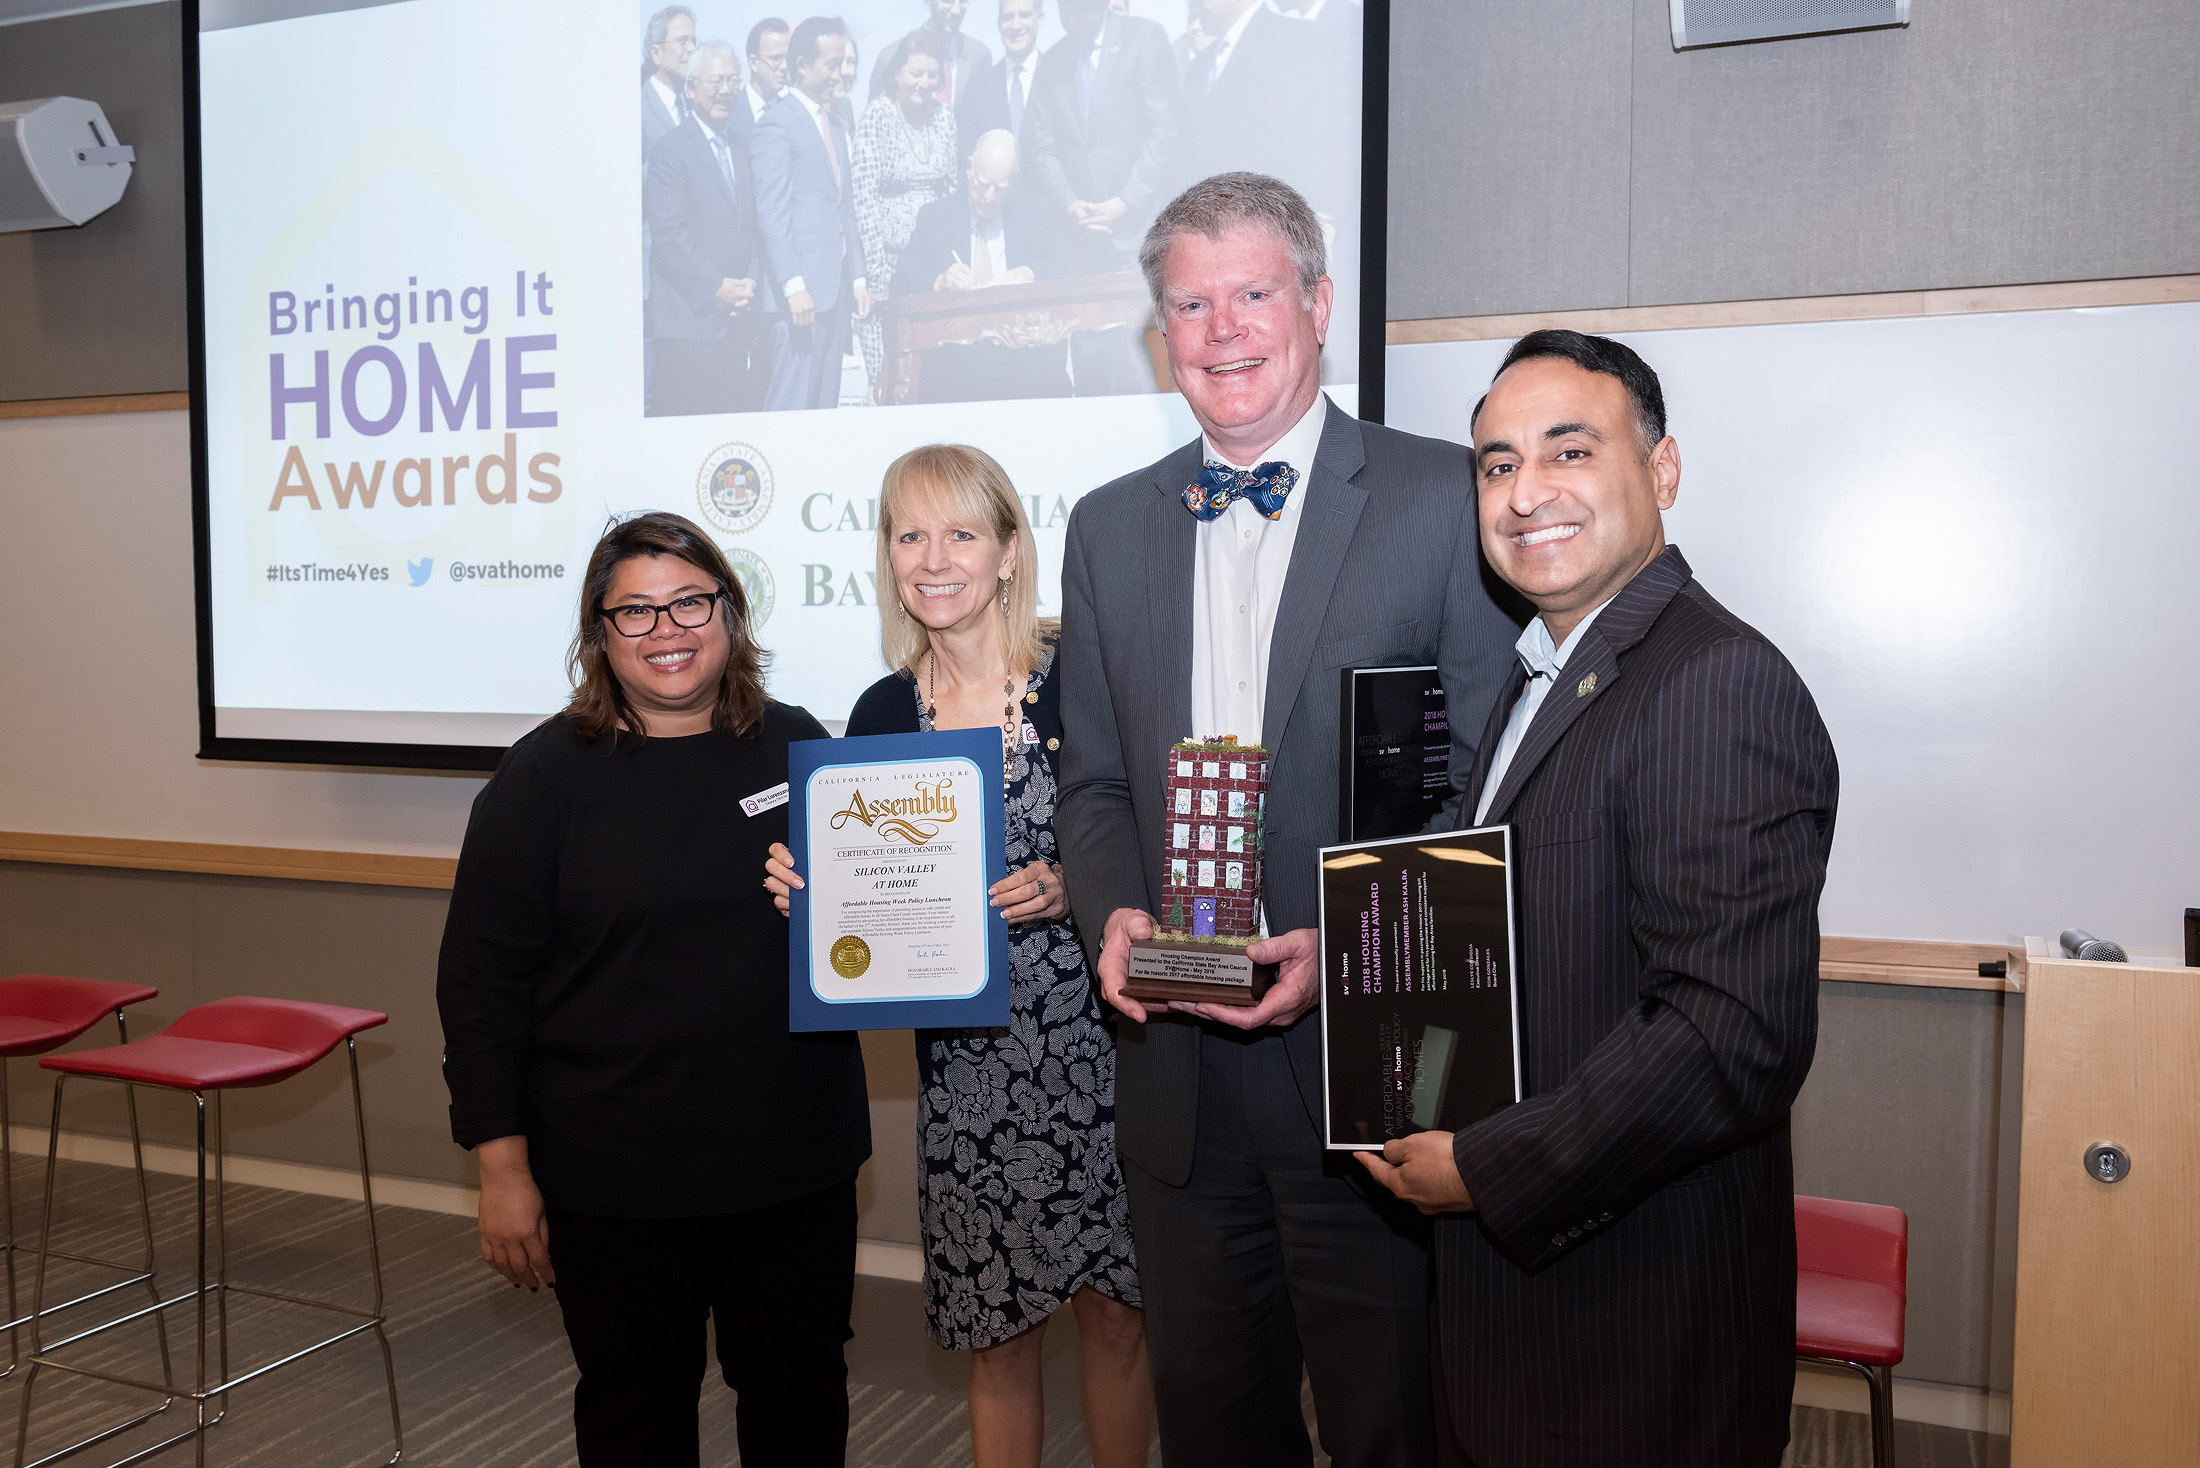 Bay Area legislative caucus members California State Assemblymembers Ash Kalra and Mark Stone accept SV@Home's Bringing It Home Awards at close of Affordable Housing Week 2018.